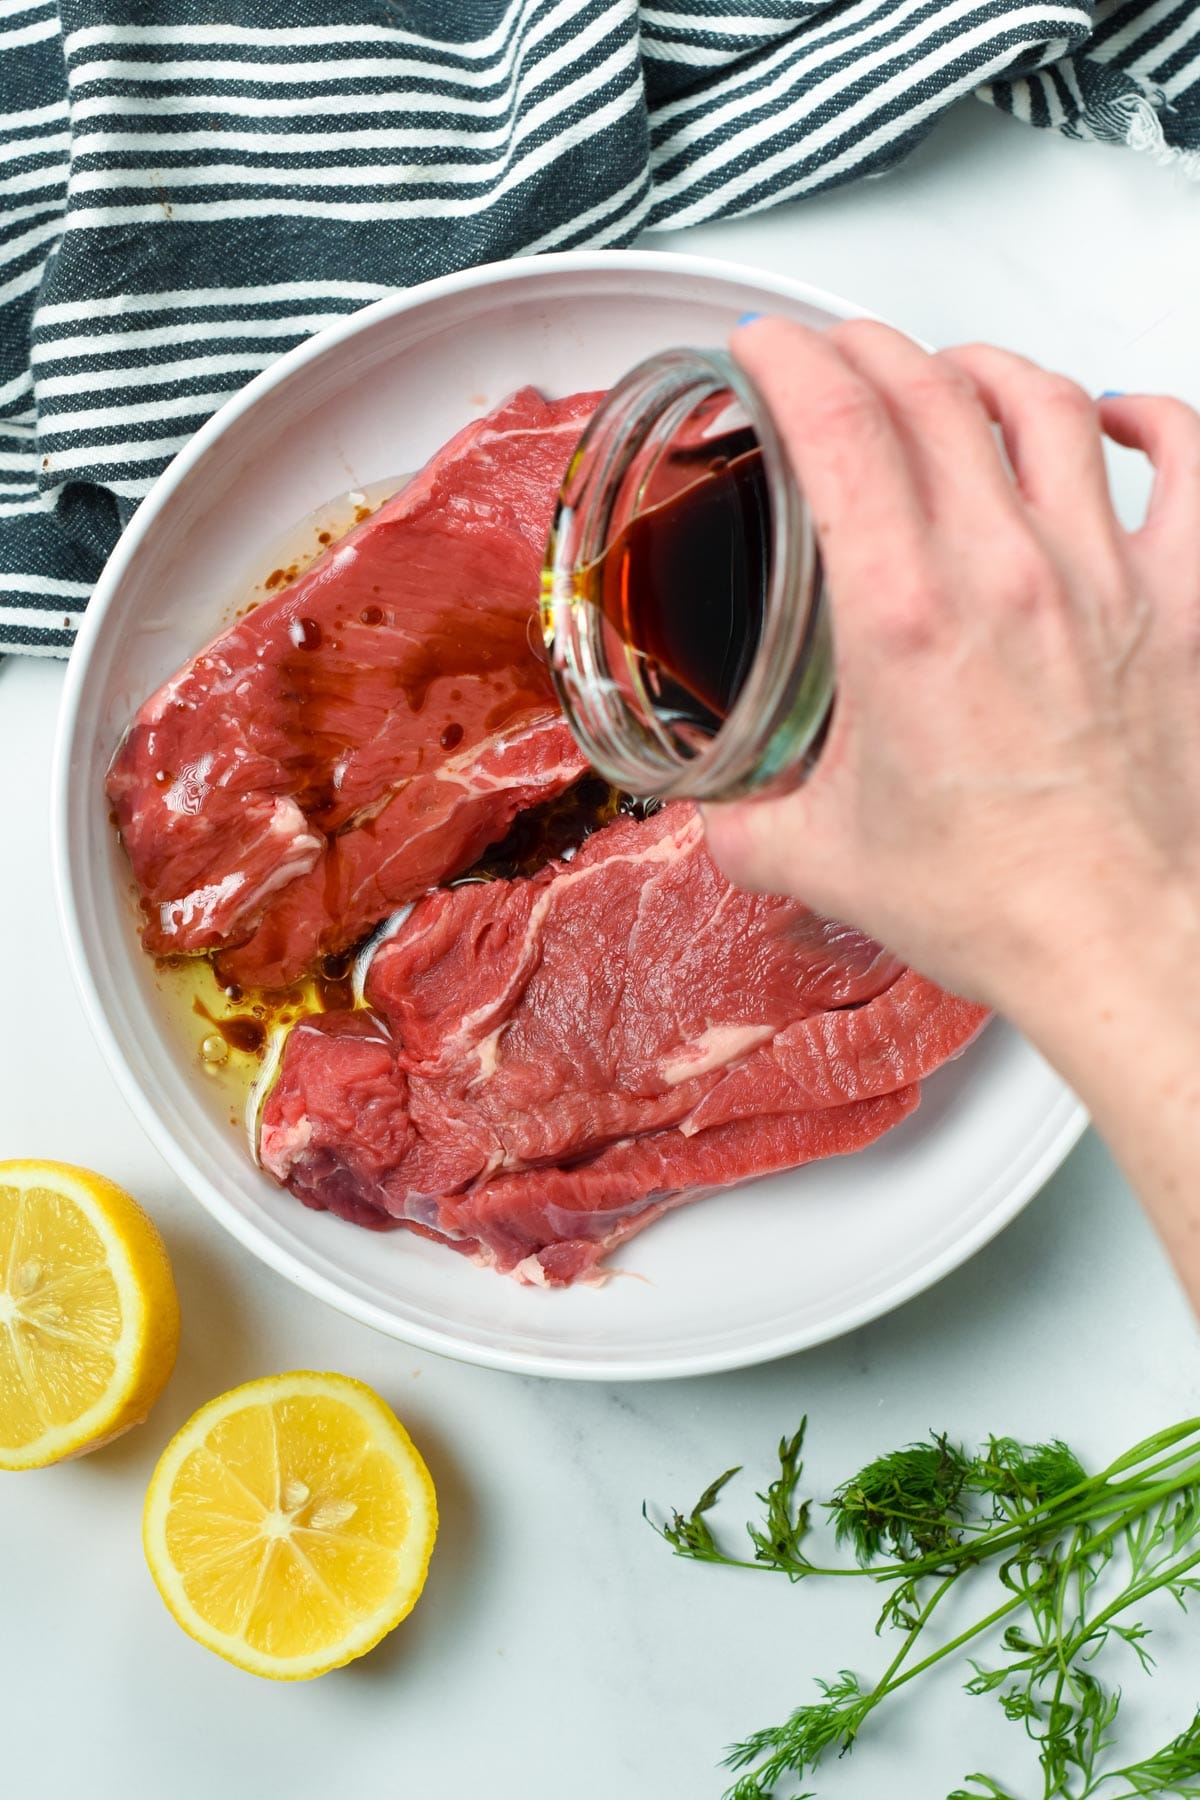 Pouring the 3 ingredient Steak Marinade on uncooked meat.